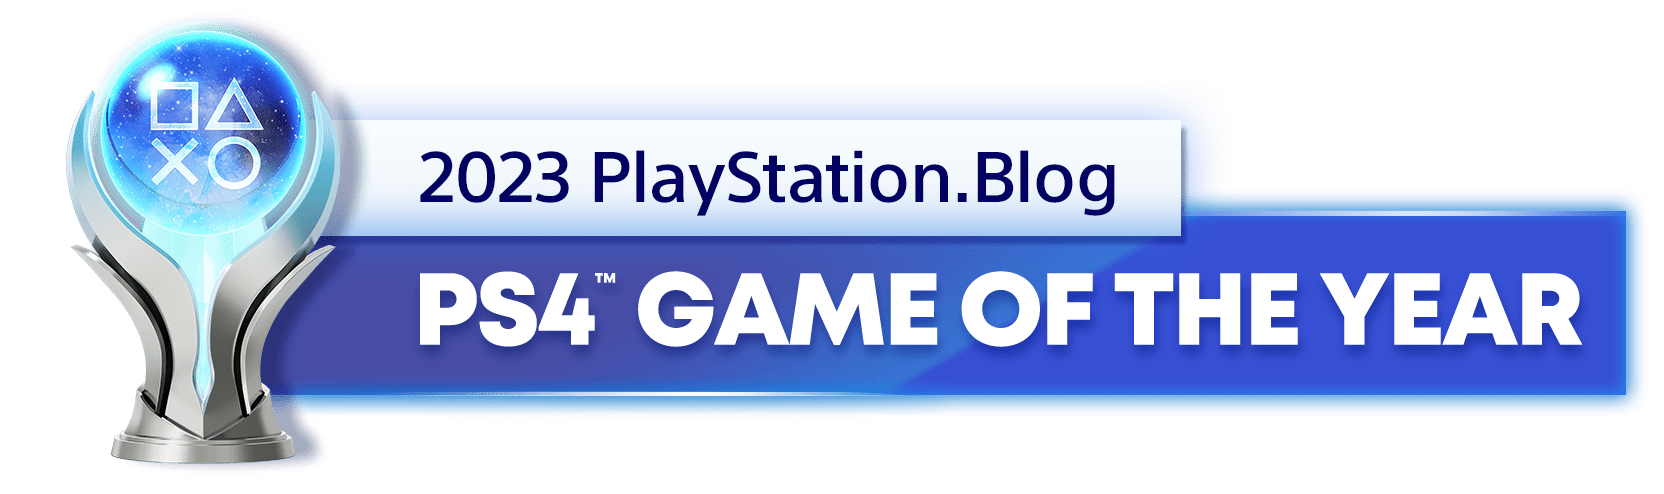 Platinum Trophy for the 2023 PlayStation Blog PS4 Game of the Year Winner